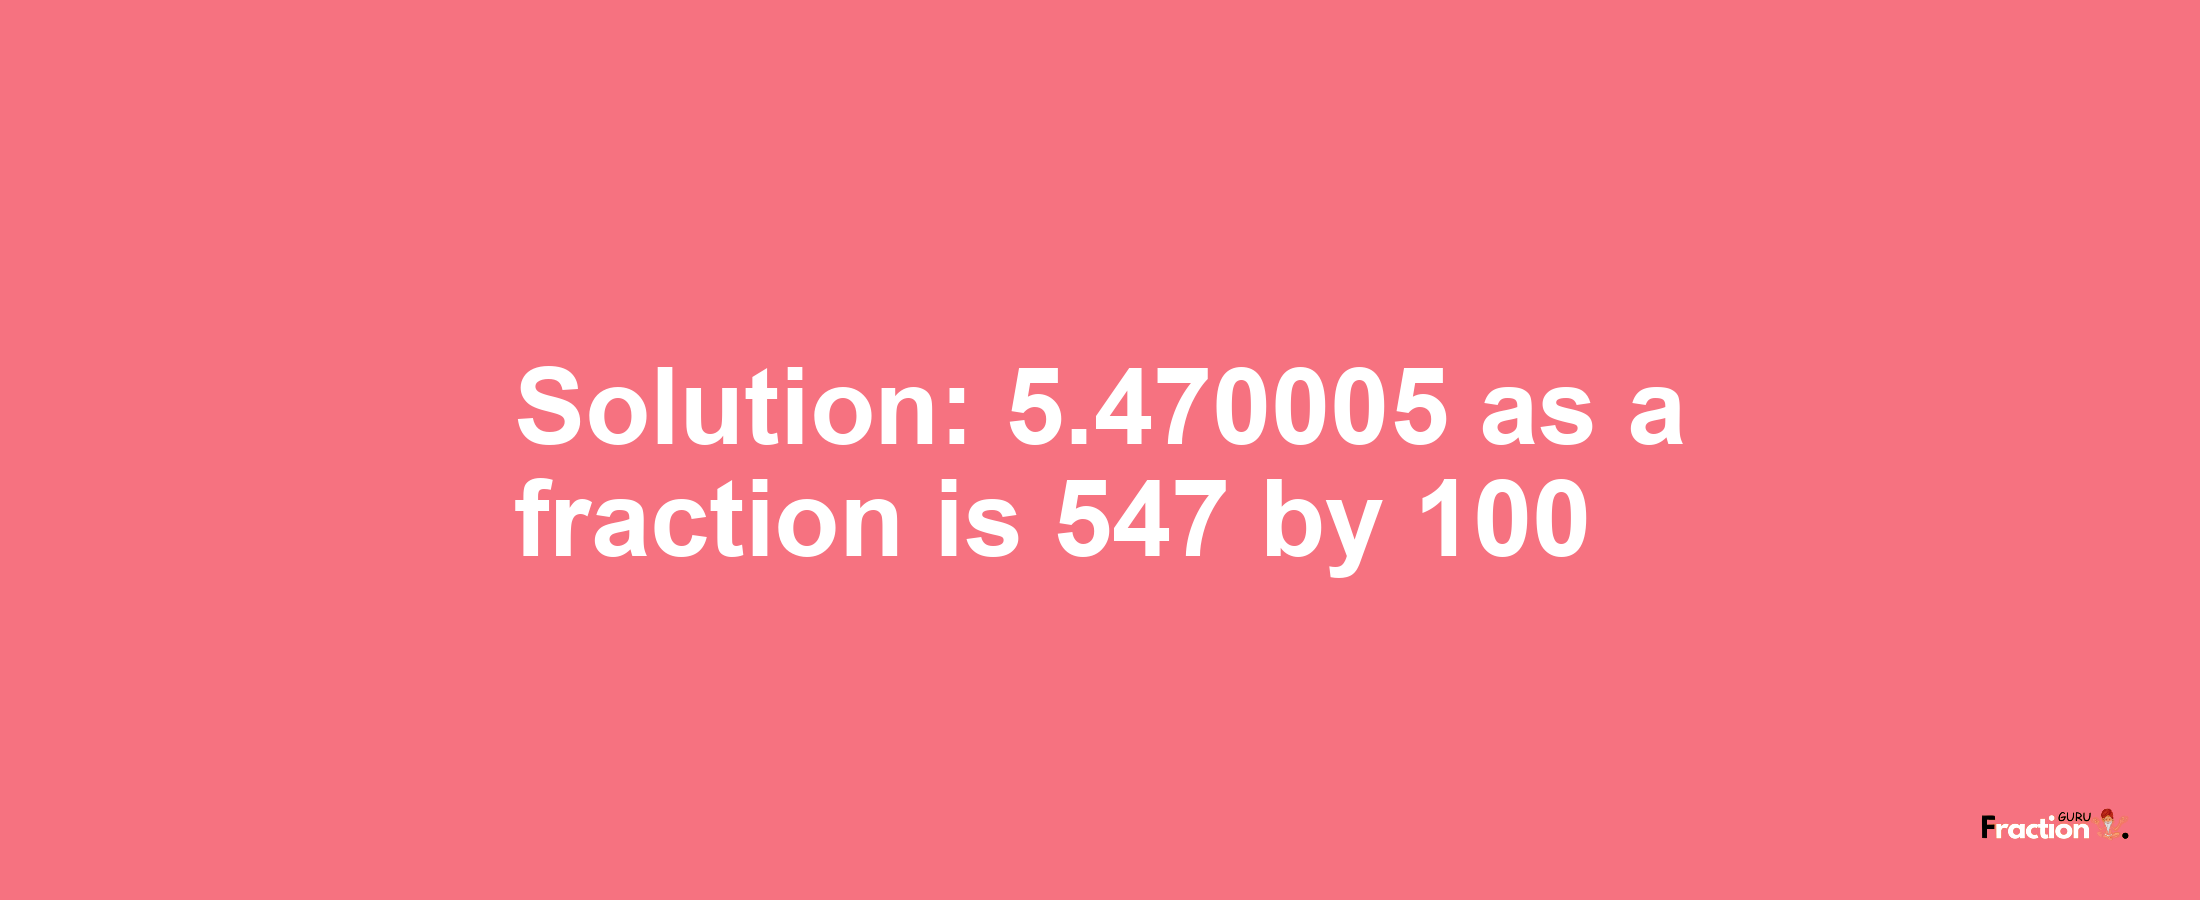 Solution:5.470005 as a fraction is 547/100